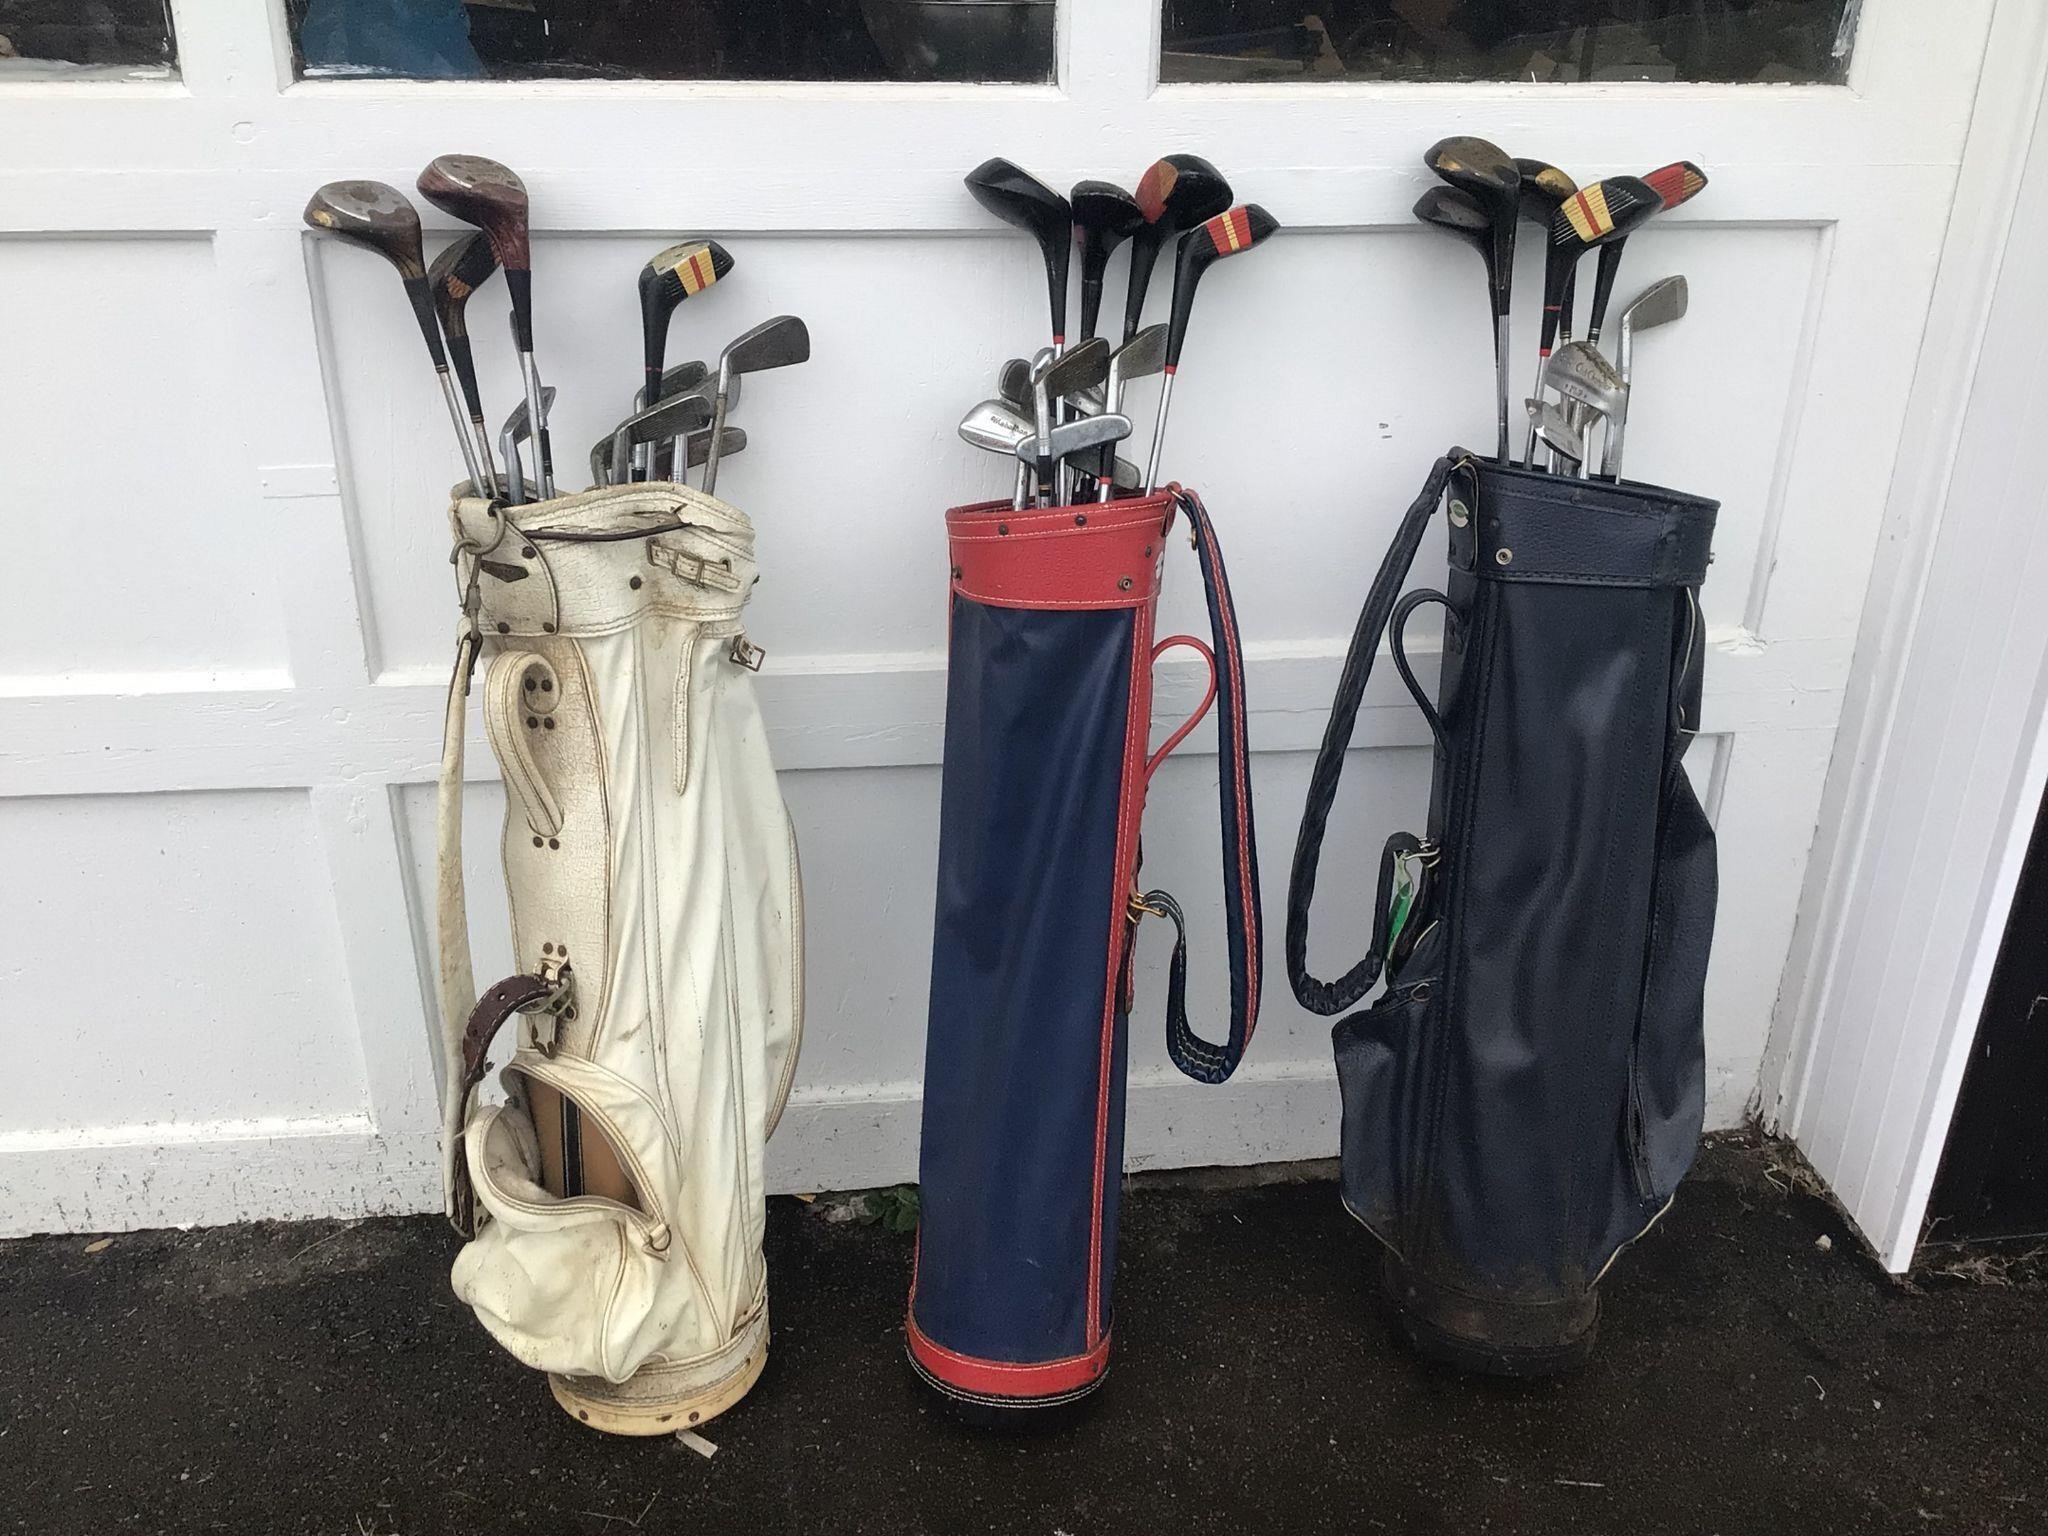 3 GOLF BAGS WITH GOLF CLUBS